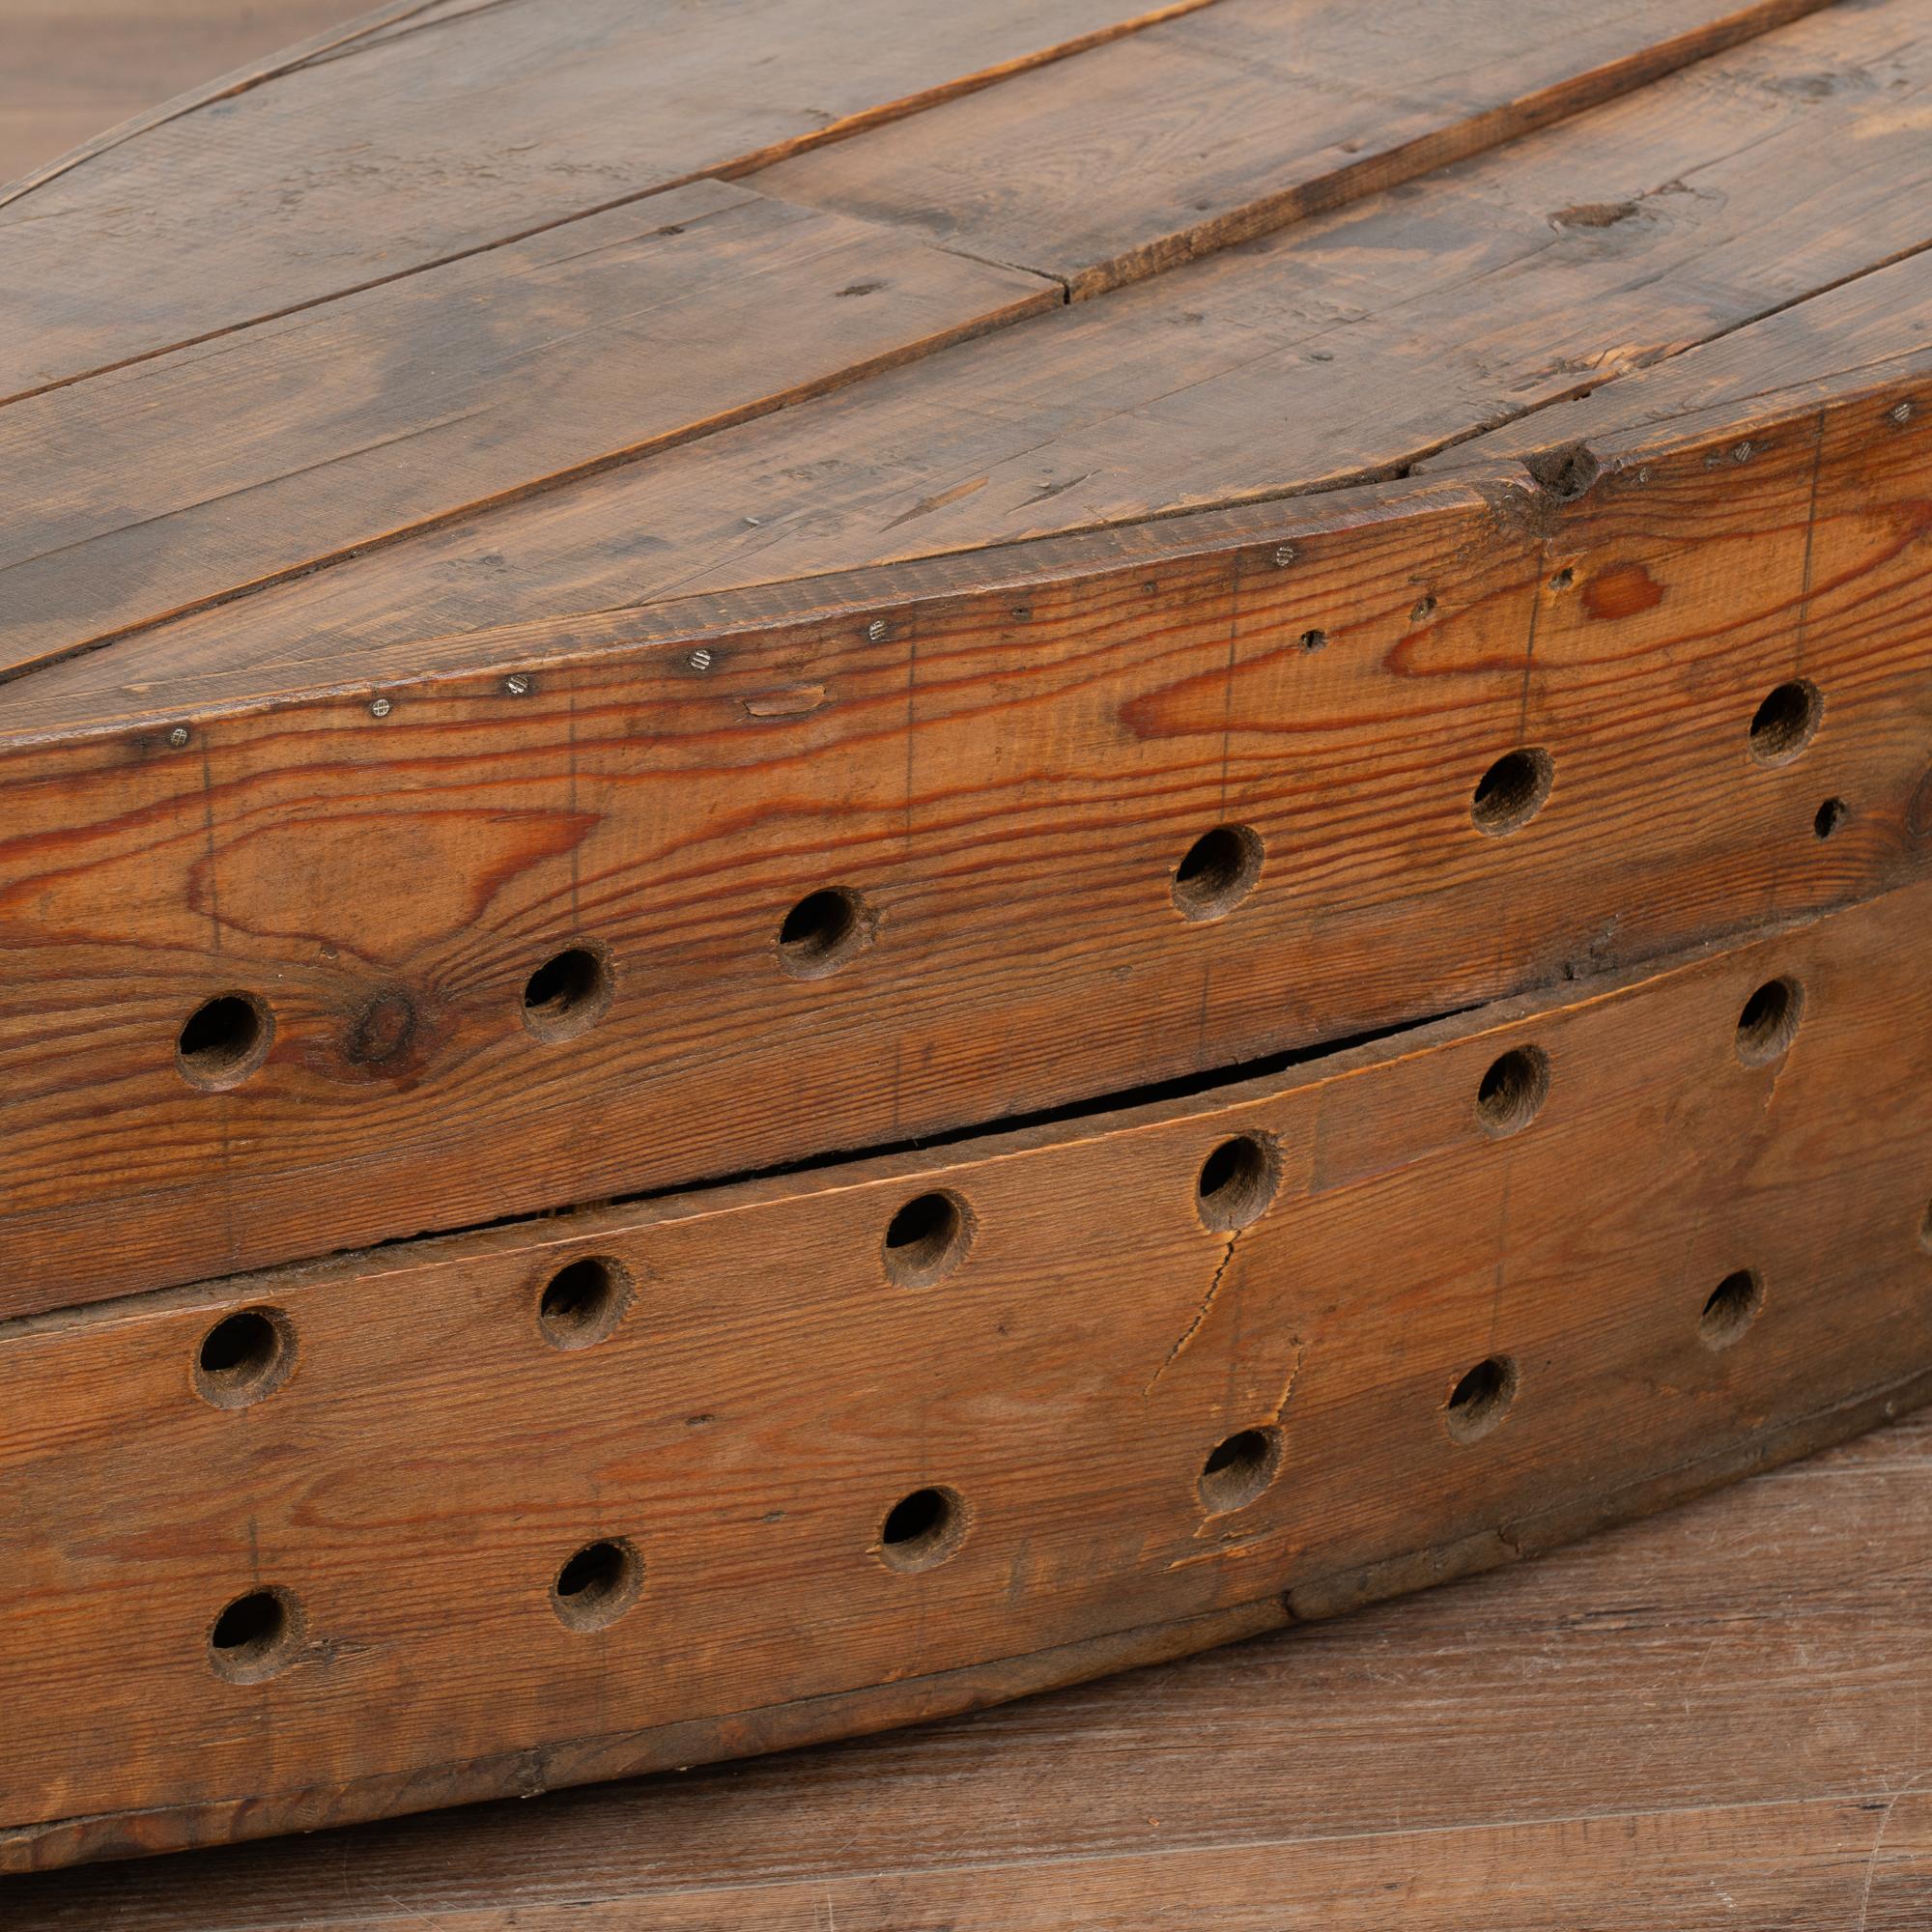 Rustic Decorative Model Boat With Holes For Fishing or Large Creel, circa 1940 For Sale 2